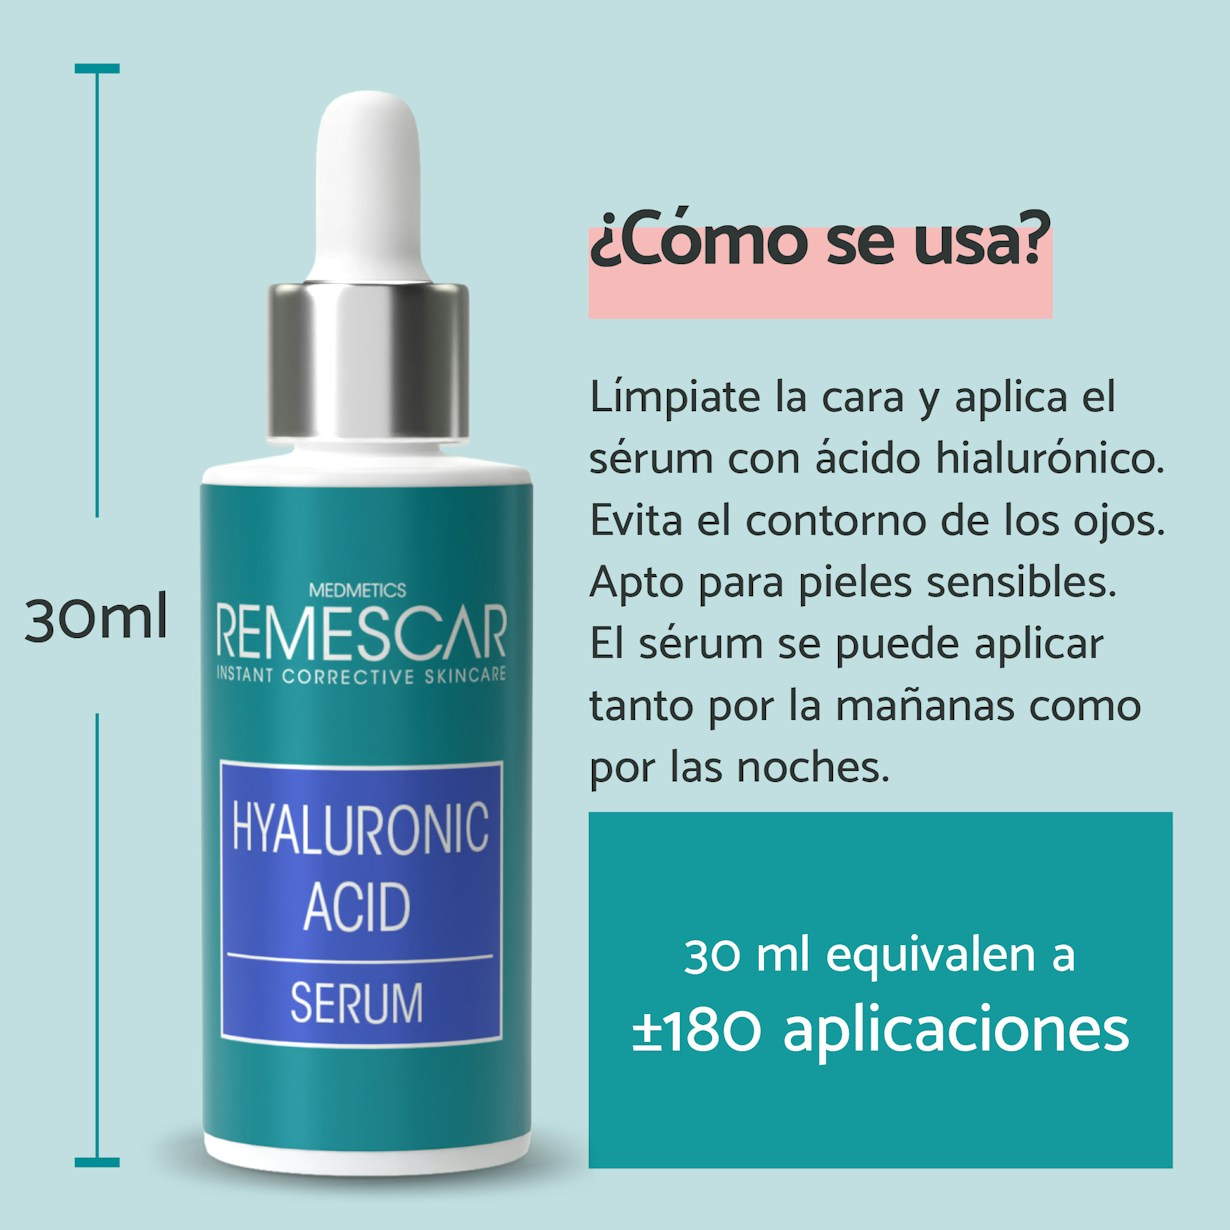 ES remescar pdp pictures website and amazon 2000x2000px hyaluronic acid3